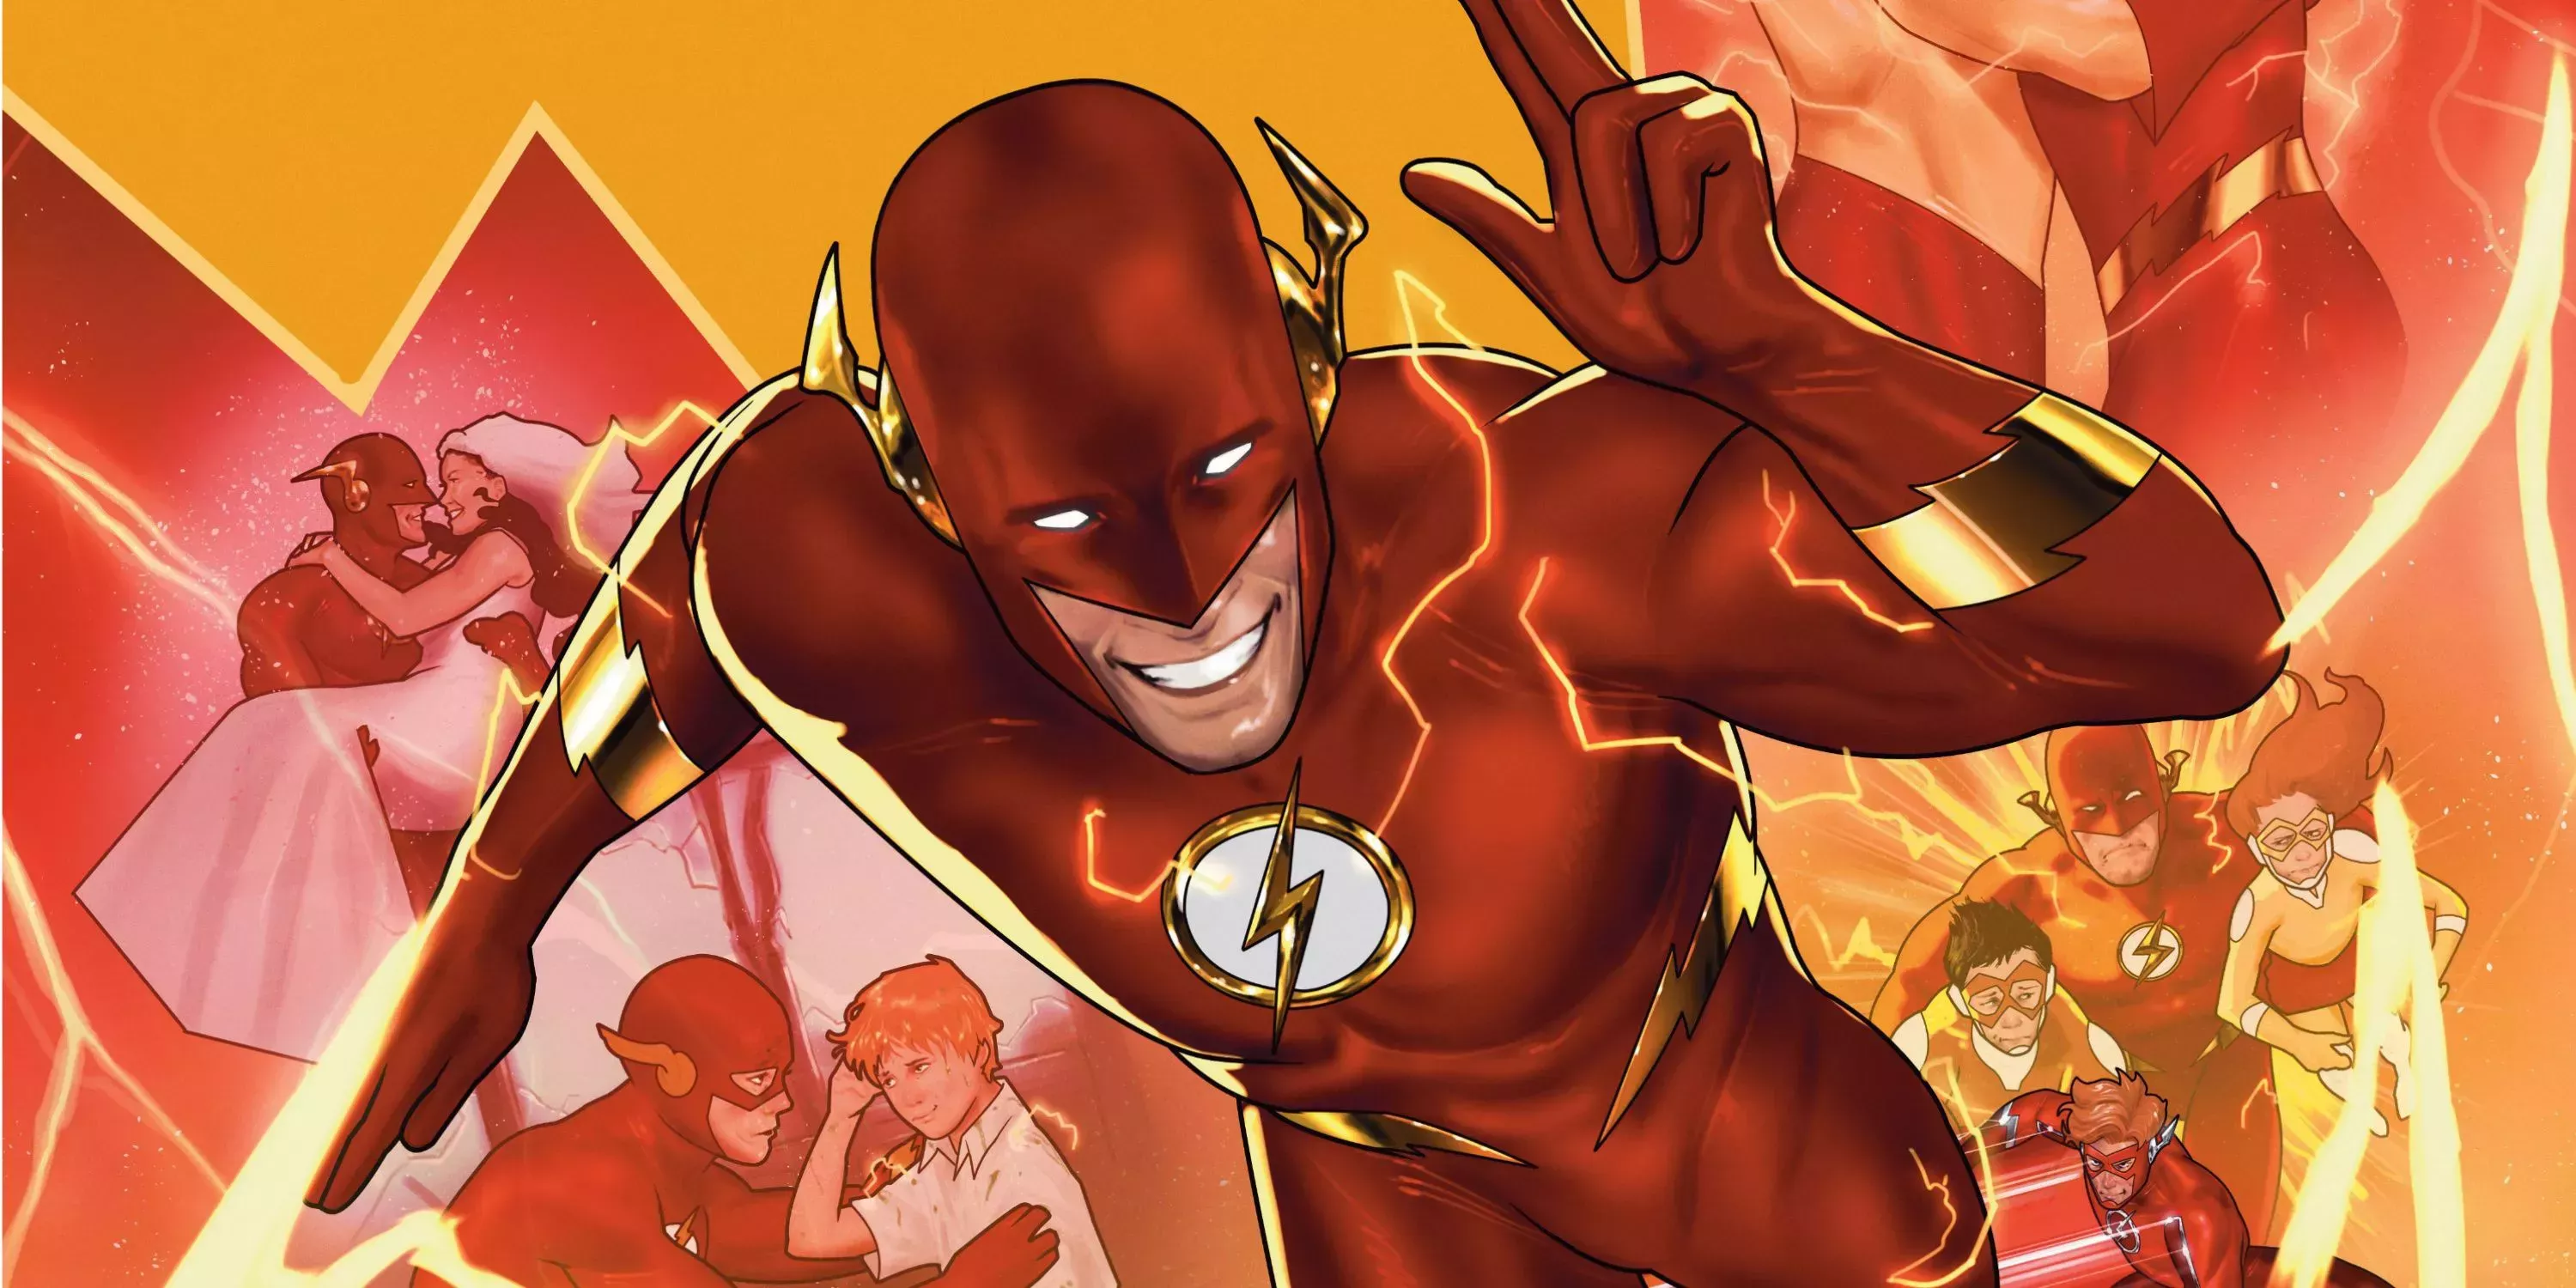 Wally West as The Flash, running in front of images from his past from DC Comics